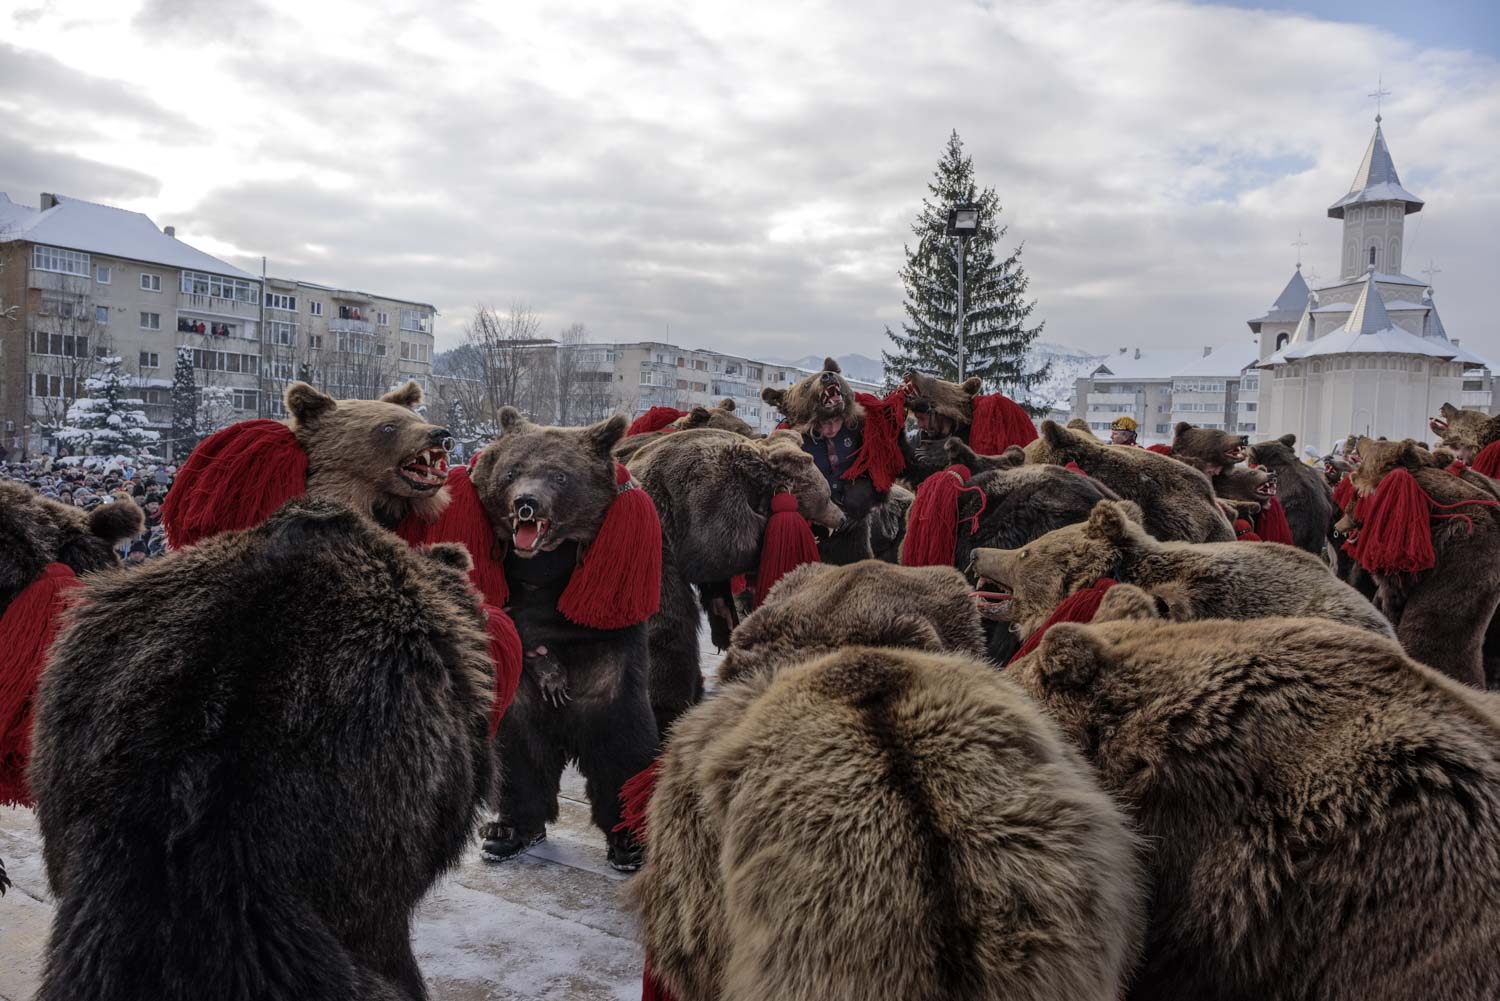  A troupe of bears performs in central Comăneşti during the town's annual Bear Parade and Competition. December 30, 2014. Comăneşti town, Bacău county, Romania. 